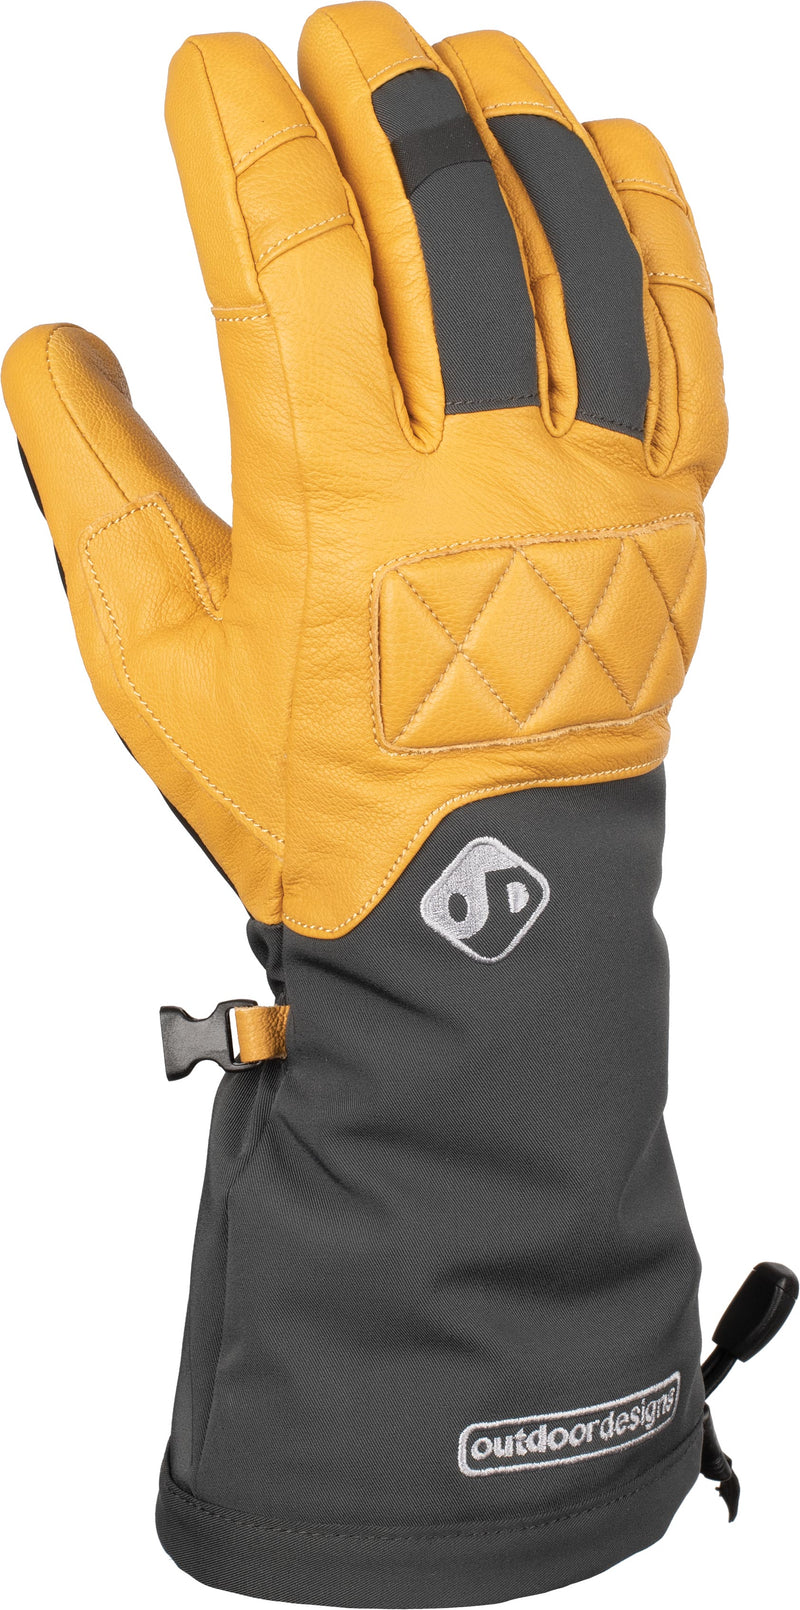 Load image into Gallery viewer, OUTDOOR-DESIGNS--Gloves-_GLVS8954
